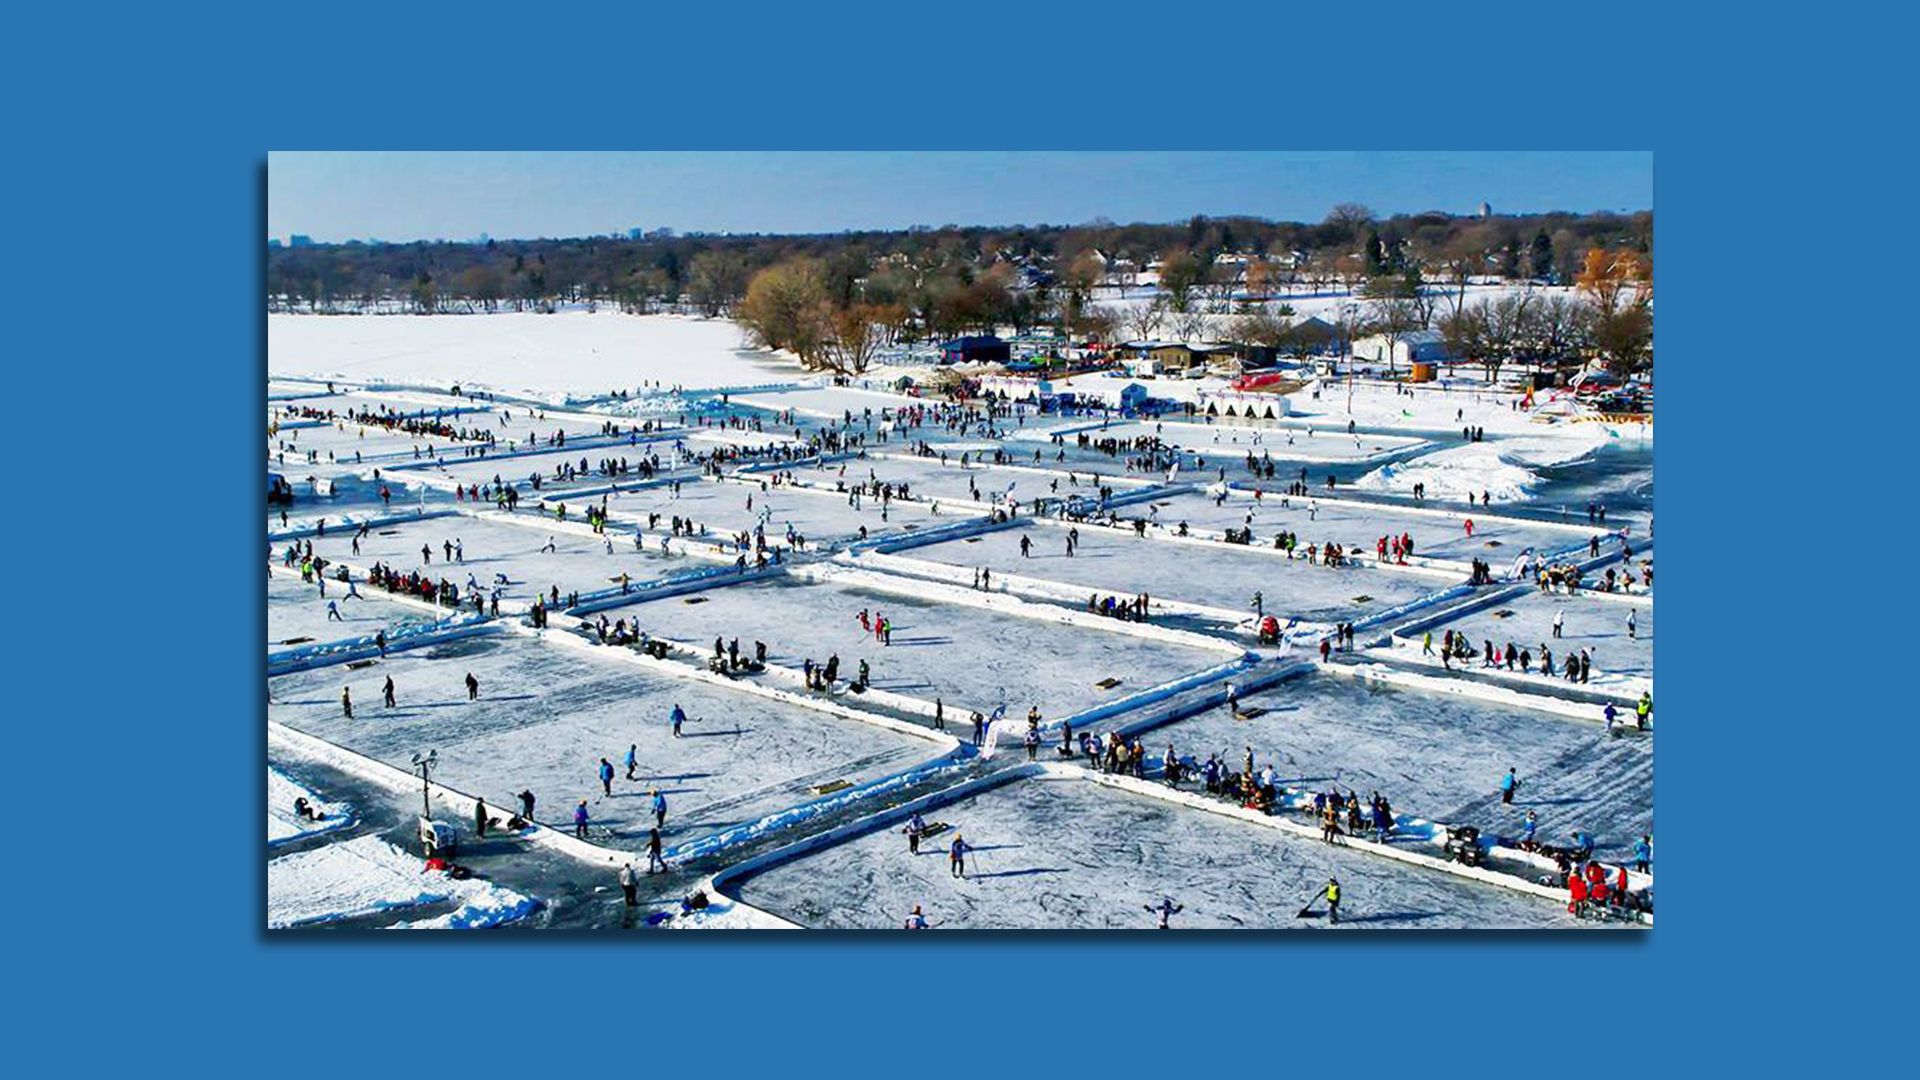 A large frozen lake divided into several ice rinks with groups of people gathered.